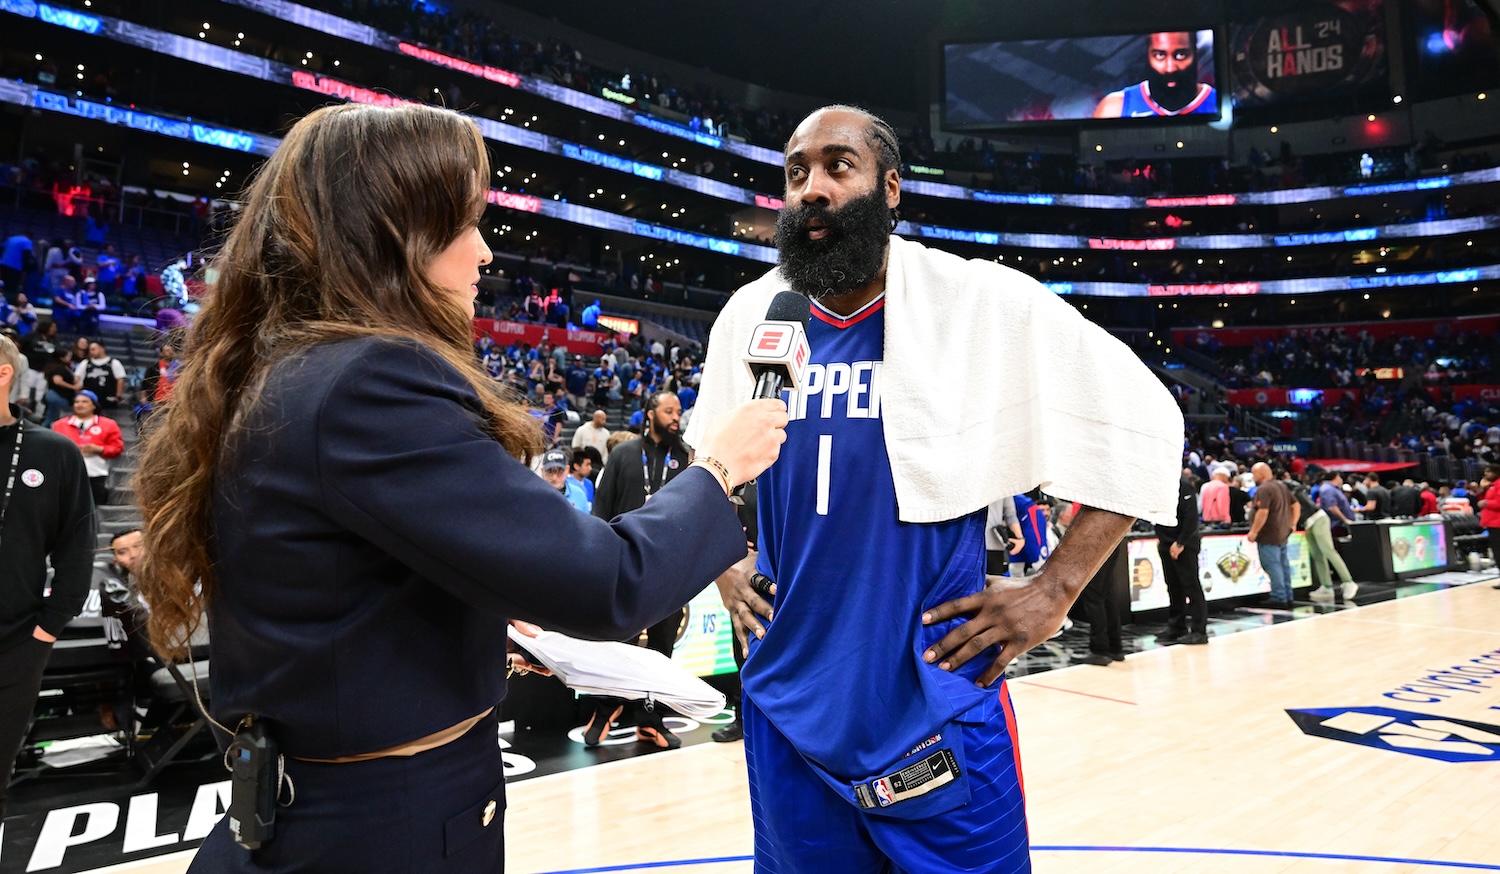 LOS ANGELES, CA - APRIL 21: James Harden #1 of the LA Clippers is interviewed by the media after Round 1 Game 1 of the 2024 NBA Playoffs on April 21, 2024 at Crypto.Com Arena in Los Angeles, California. NOTE TO USER: User expressly acknowledges and agrees that, by downloading and/or using this Photograph, user is consenting to the terms and conditions of the Getty Images License Agreement. Mandatory Copyright Notice: Copyright 2024 NBAE (Photo by Adam Pantozzi/NBAE via Getty Images)